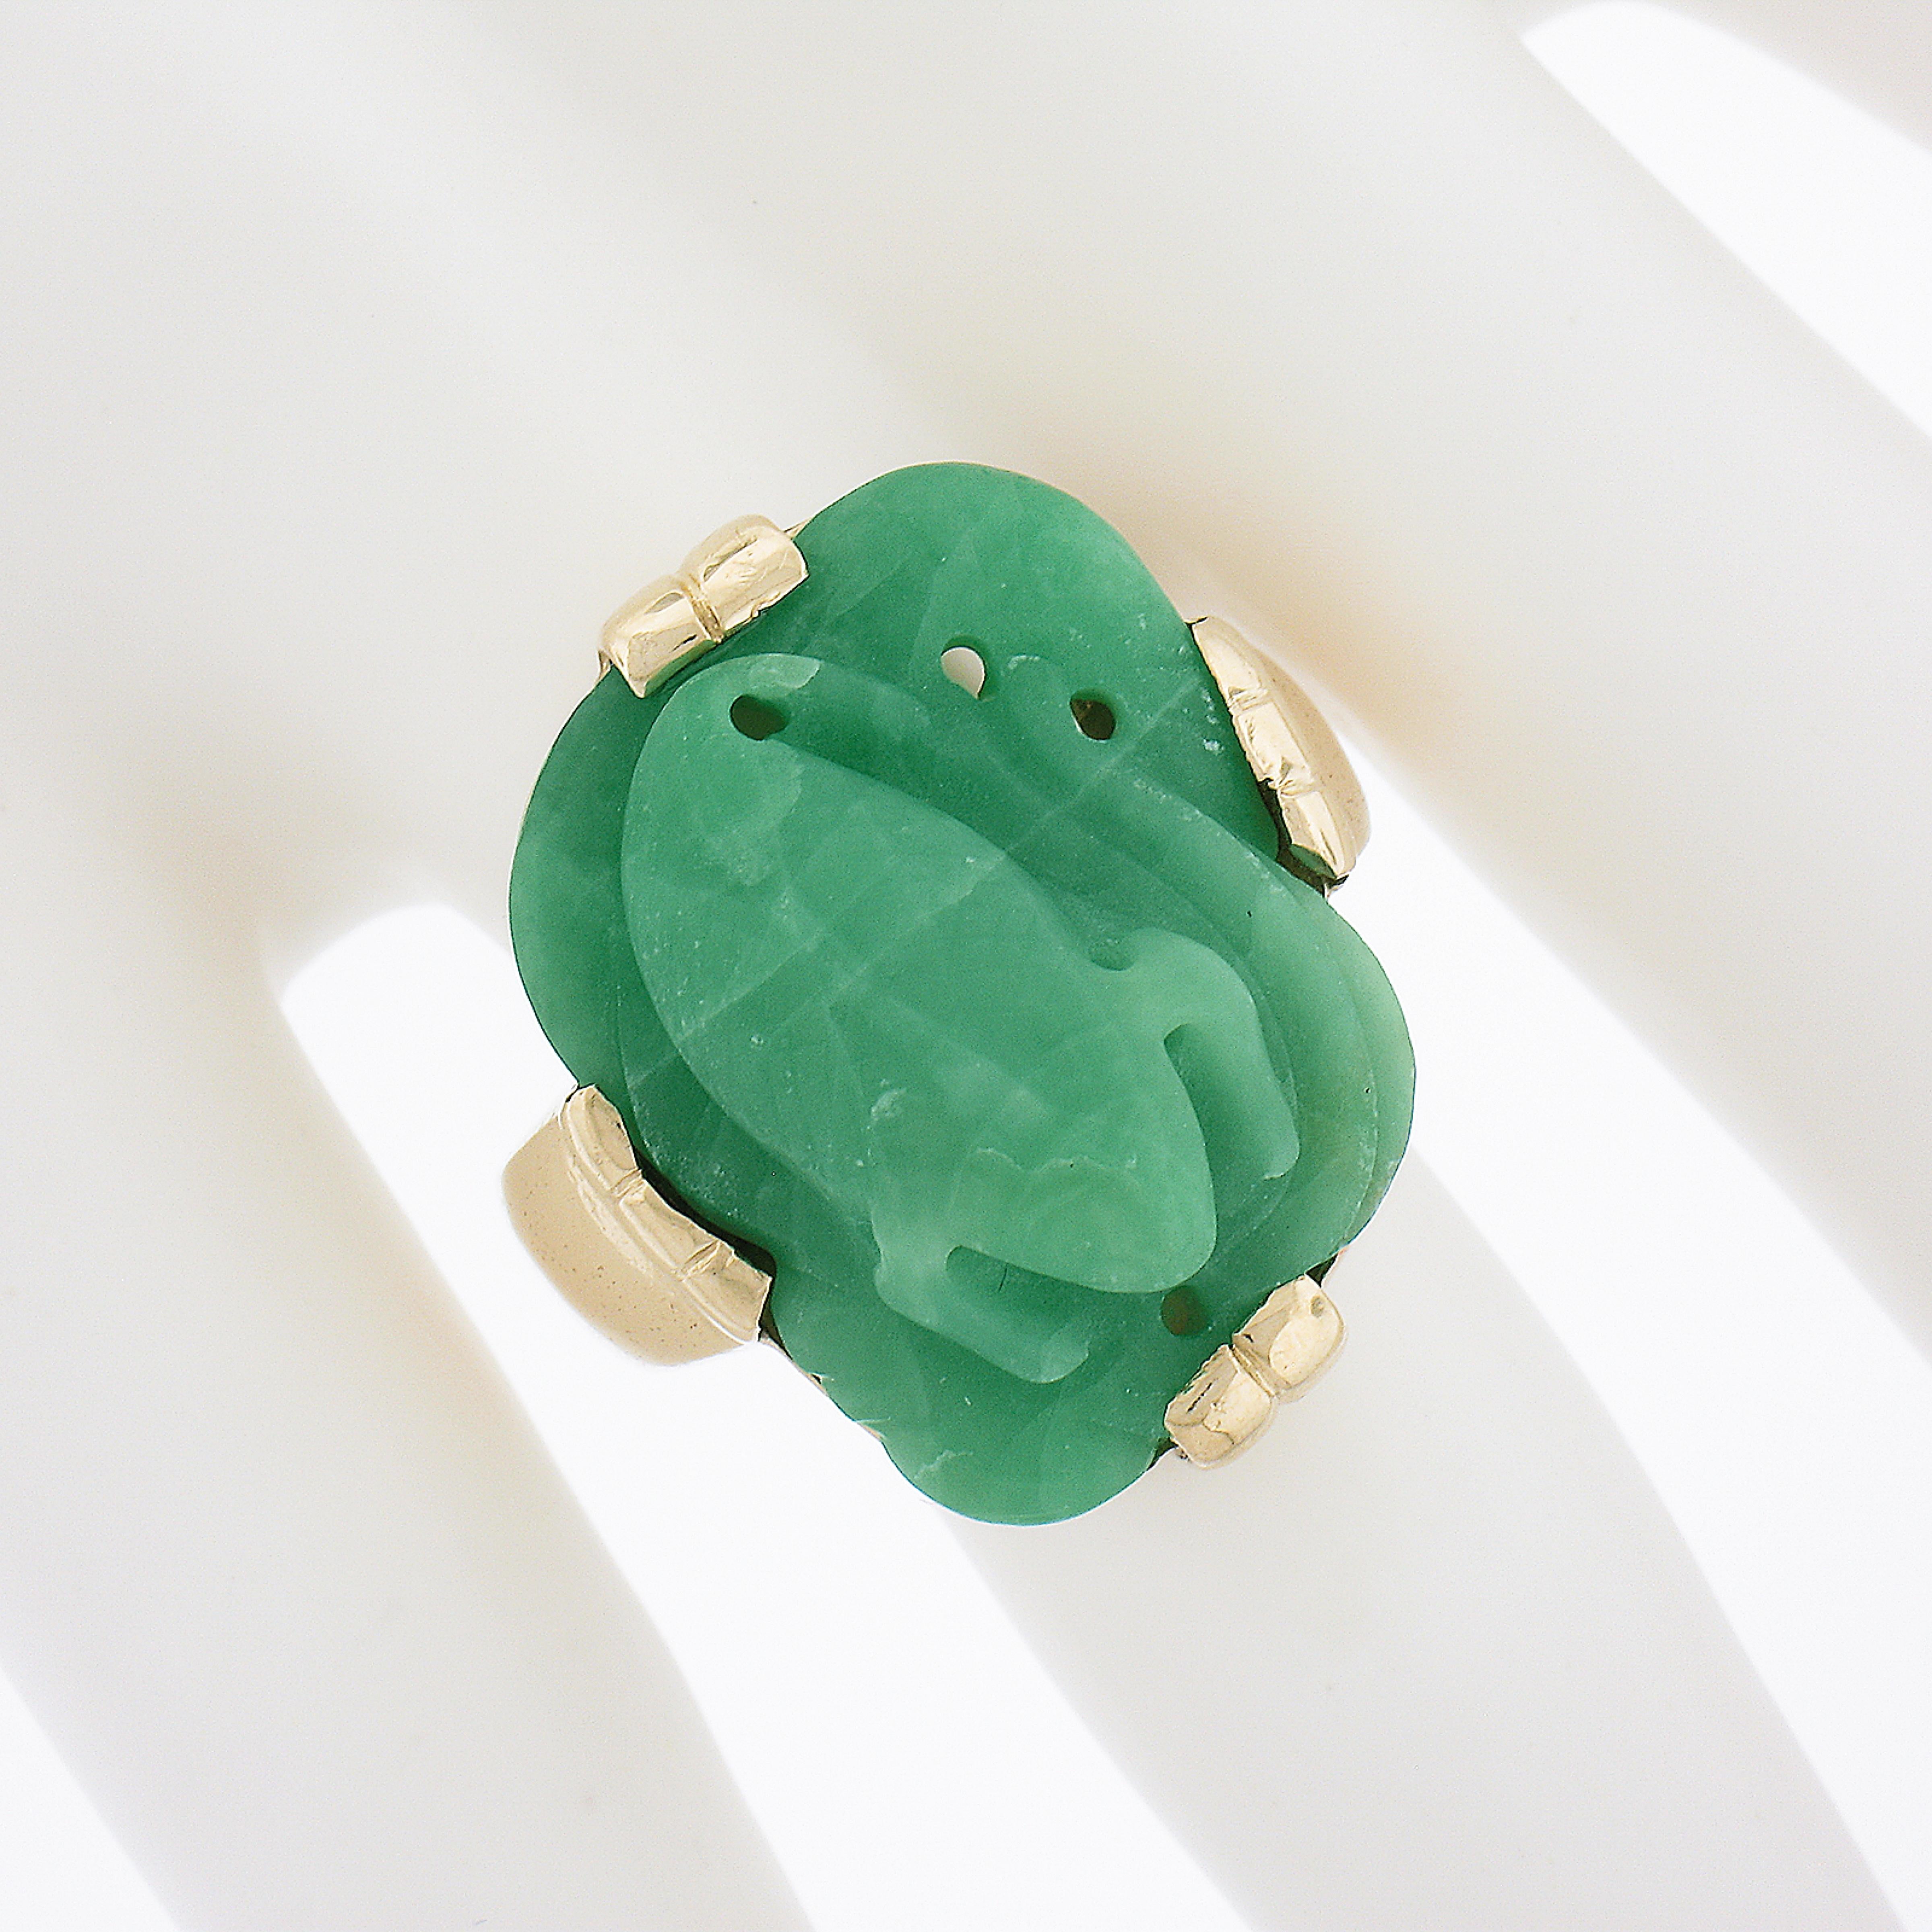 Vintage Solid 14k Yellow Gold Carved Jade Lizard / Salamander Cocktail Ring In Excellent Condition For Sale In Montclair, NJ